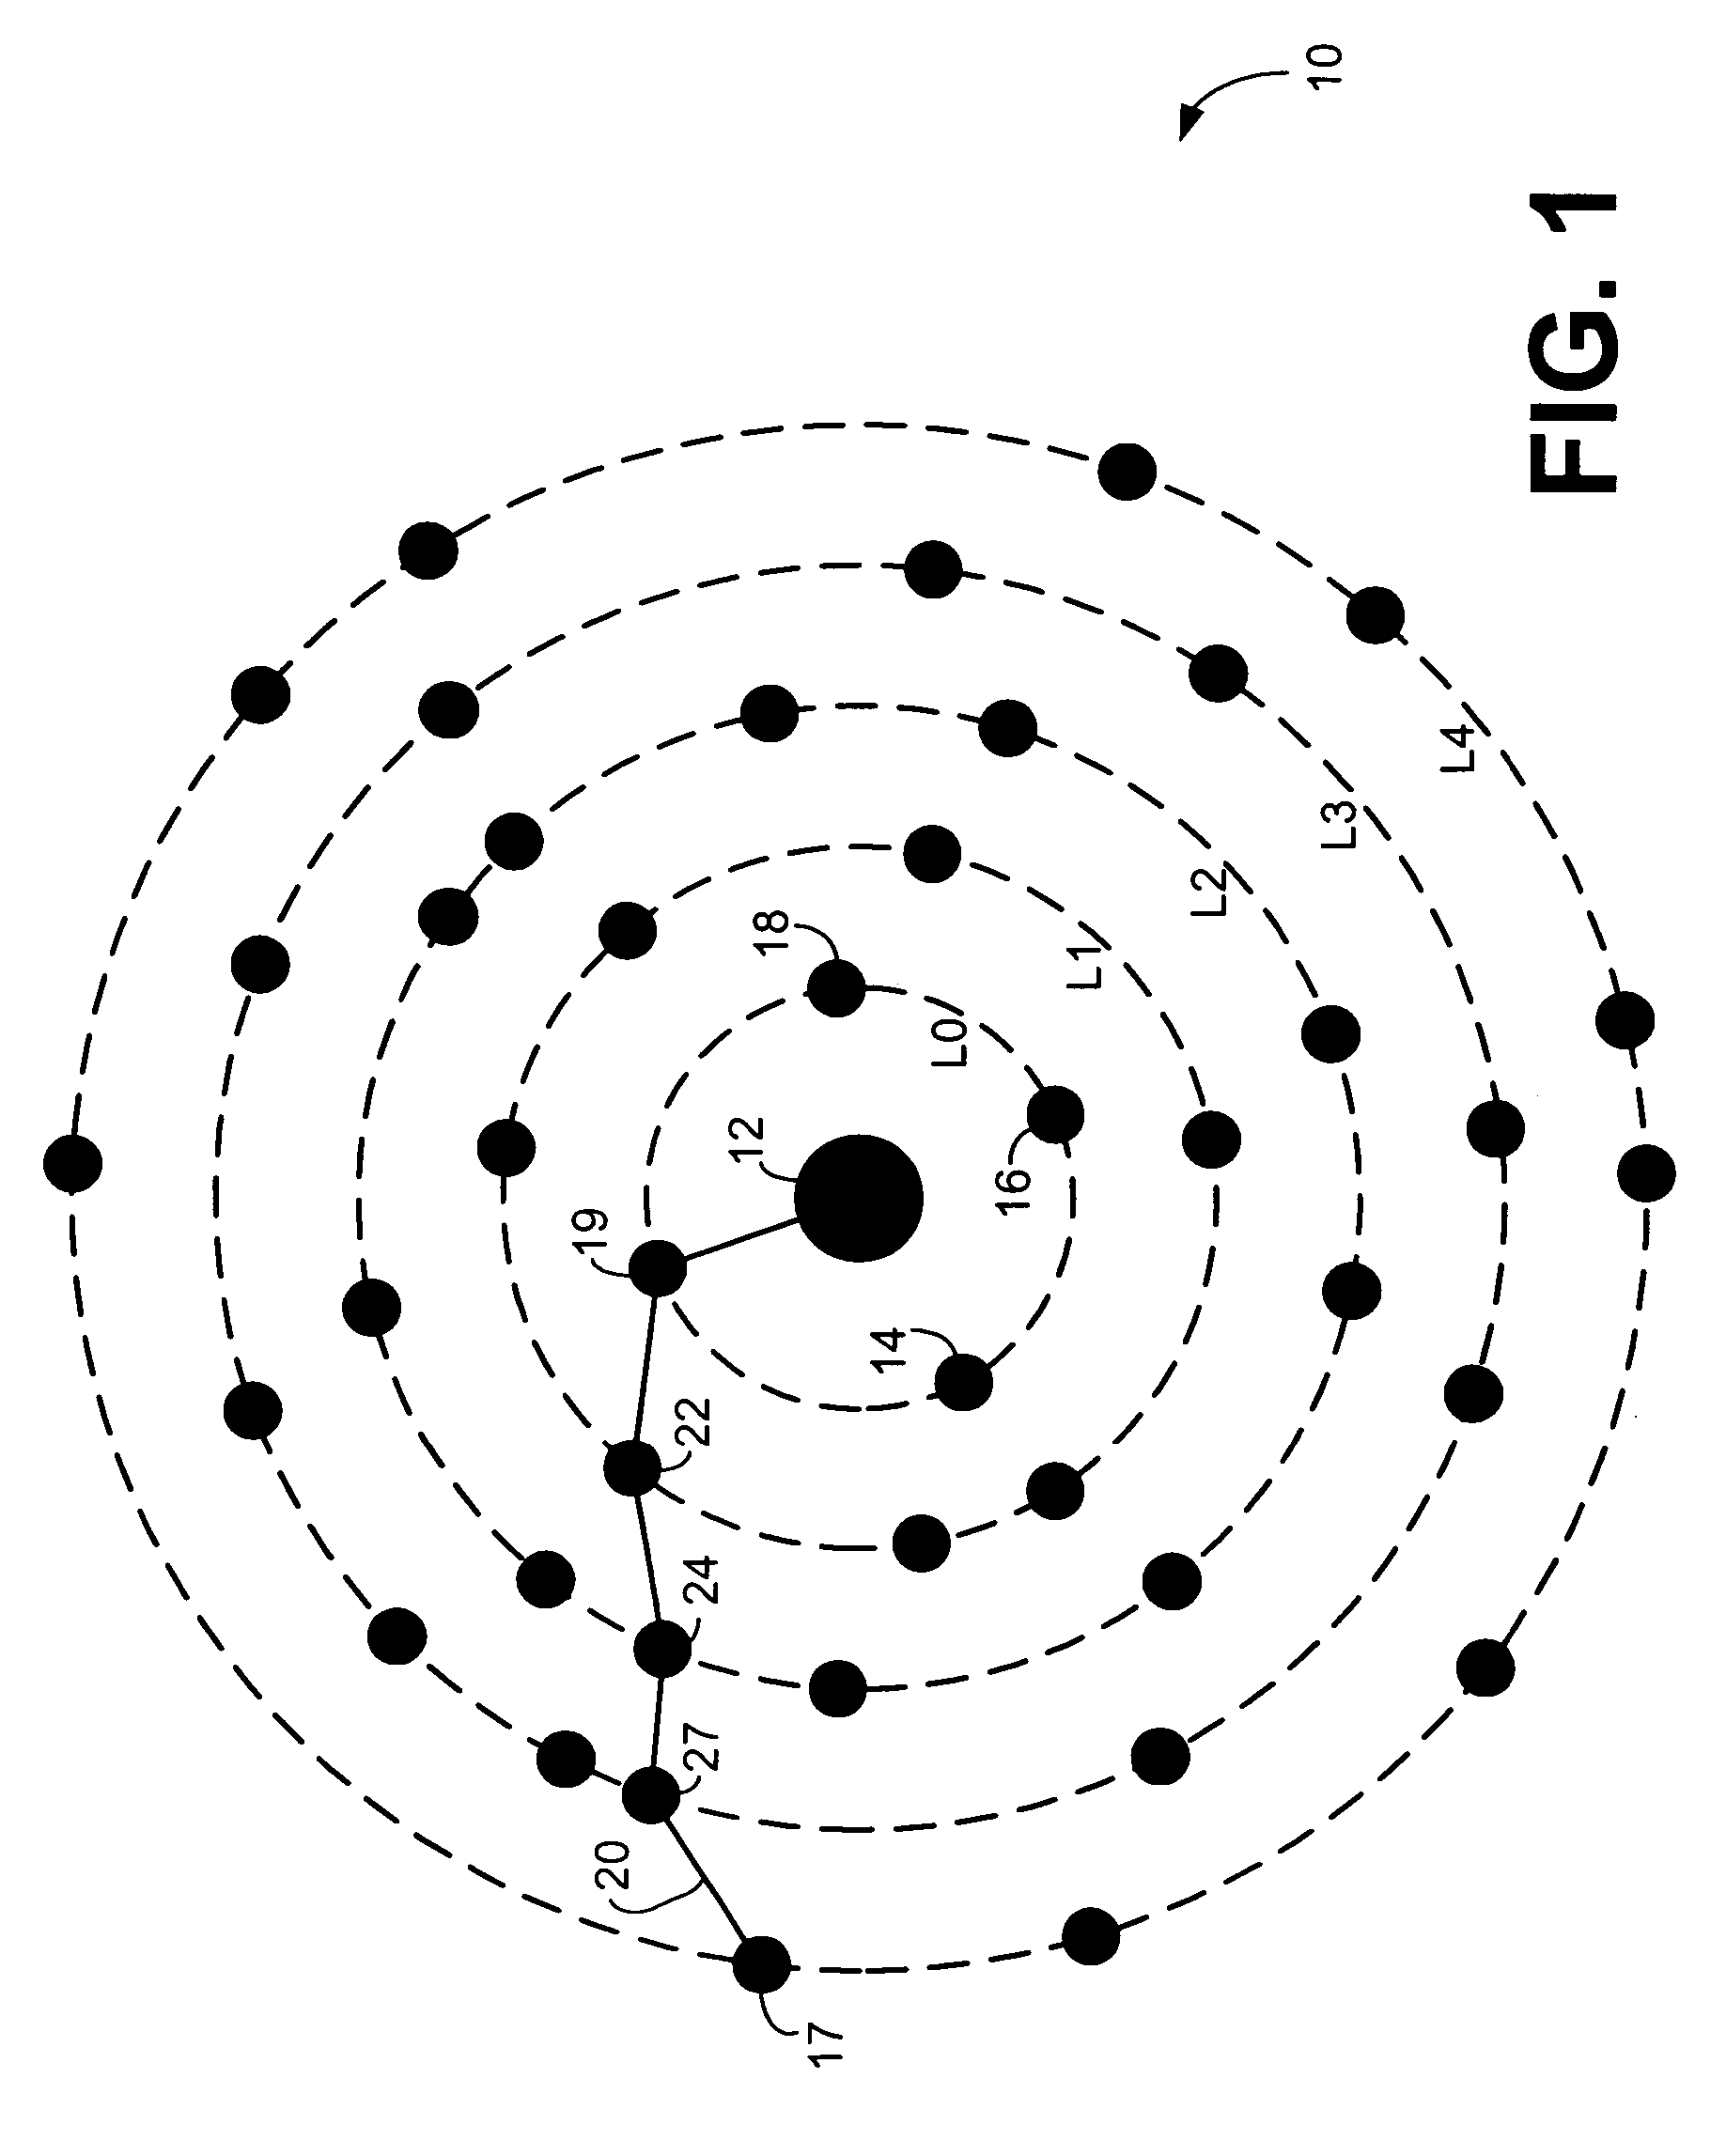 System and method for communicating alarm conditions in a mesh network